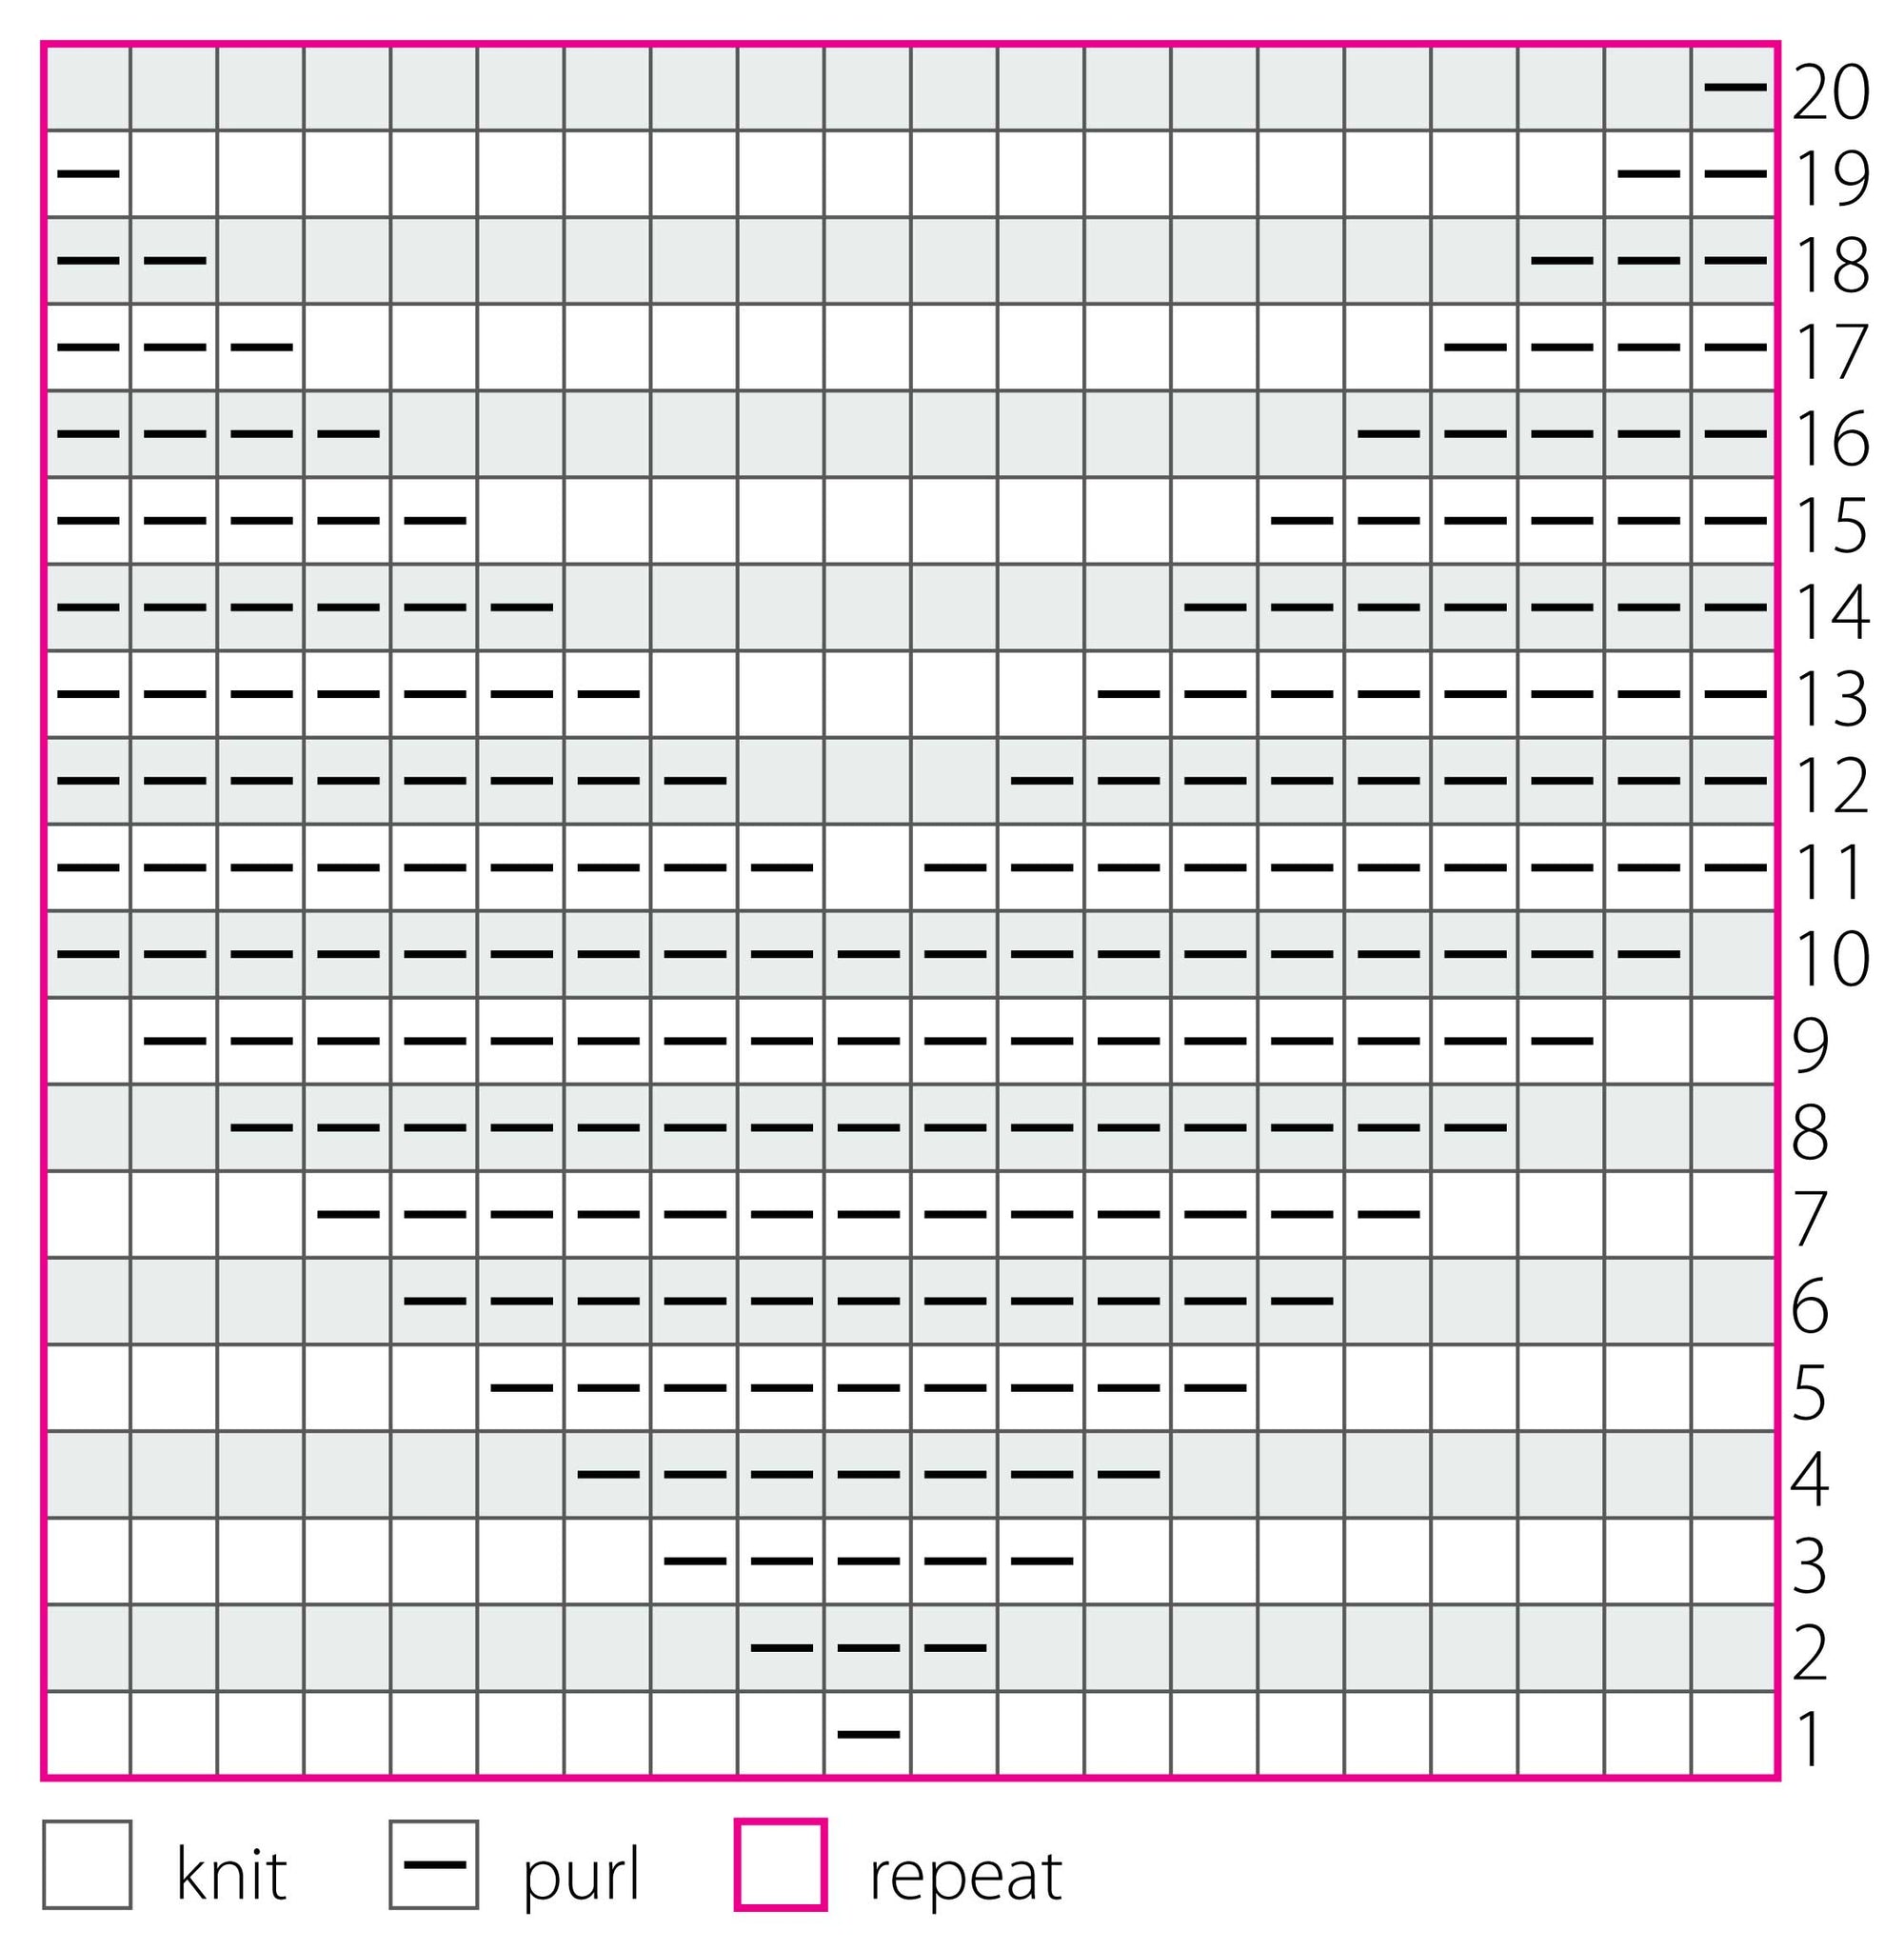 knitting chart showing a knit and purl pattern